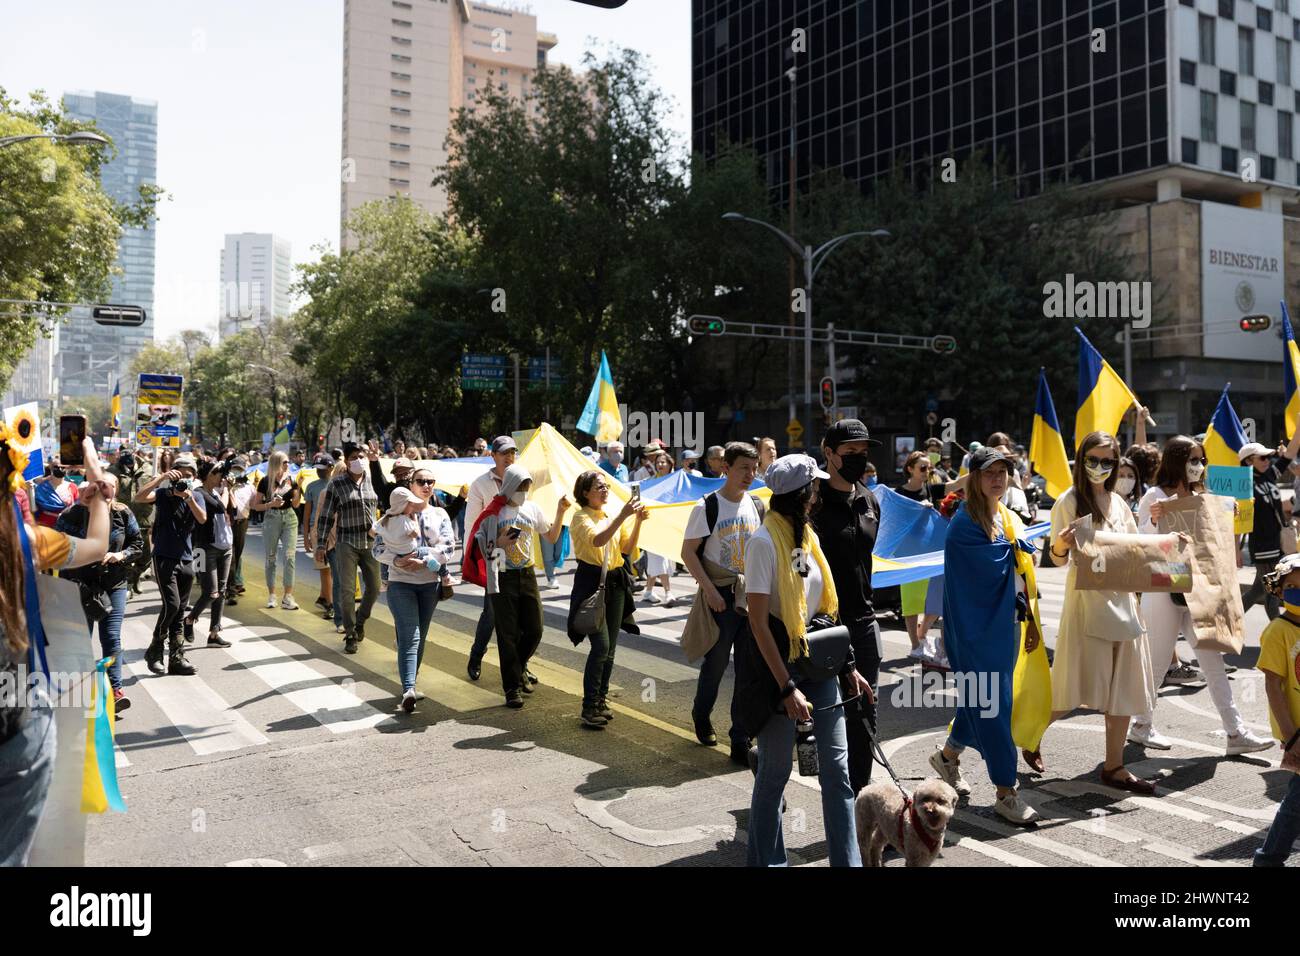 Anti-war protests in Mexico City Ukrainian supporters demonstration in Reforma Street. Flags, indignation and large group of people walking. Stock Photo